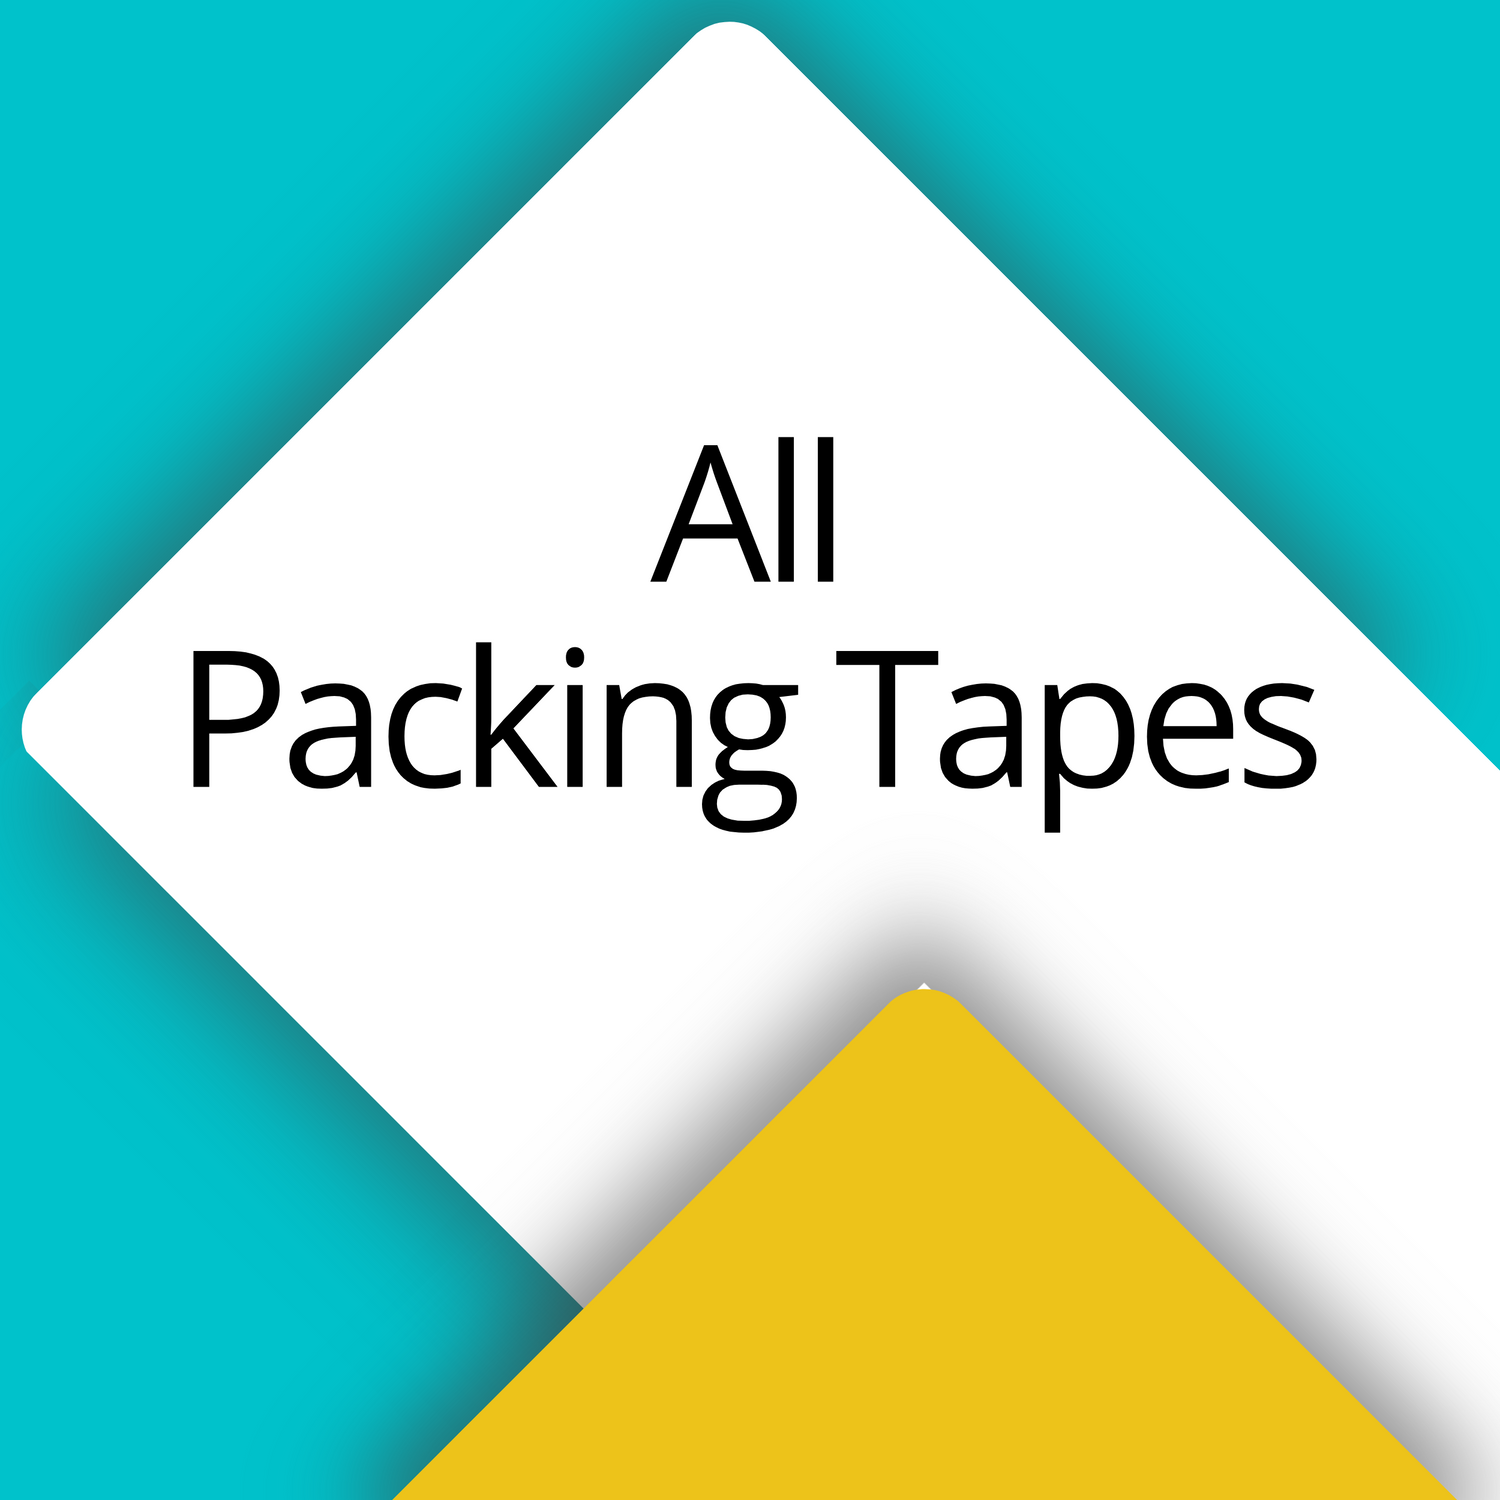 Hot Pawz Packing Tapes All Packaging Tapes